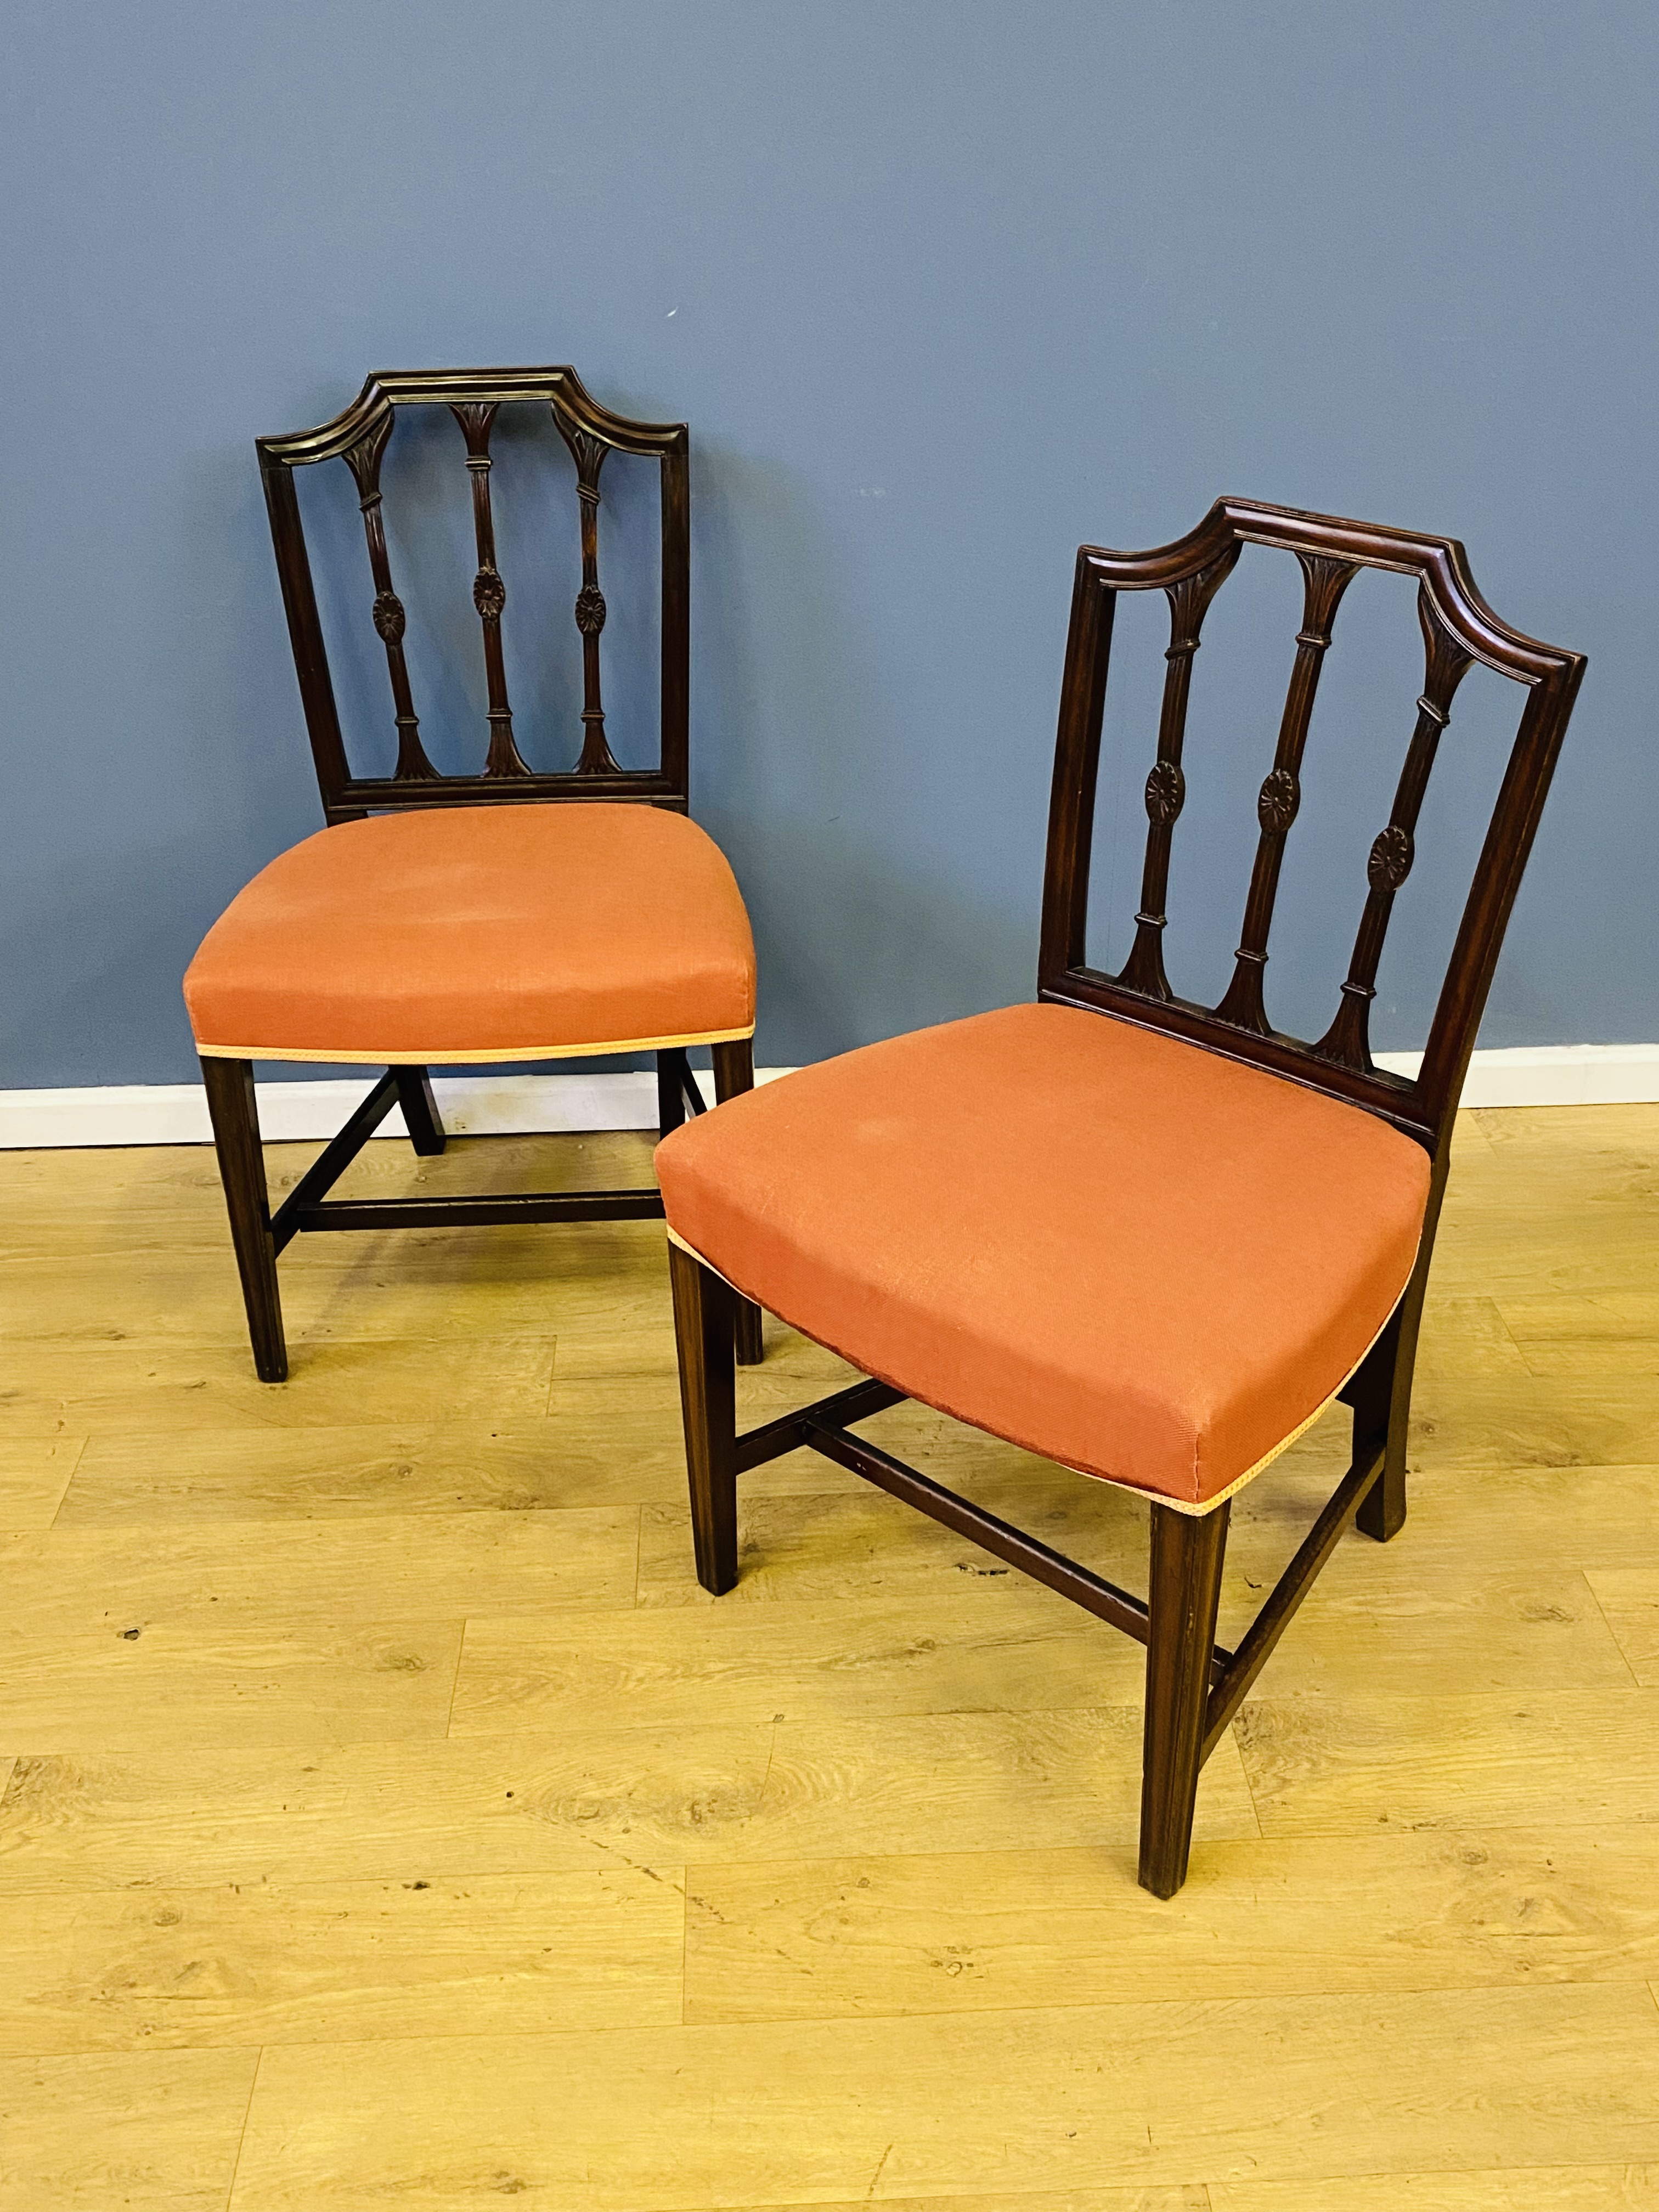 Pair of 19th century mahogany side chairs - Image 2 of 6